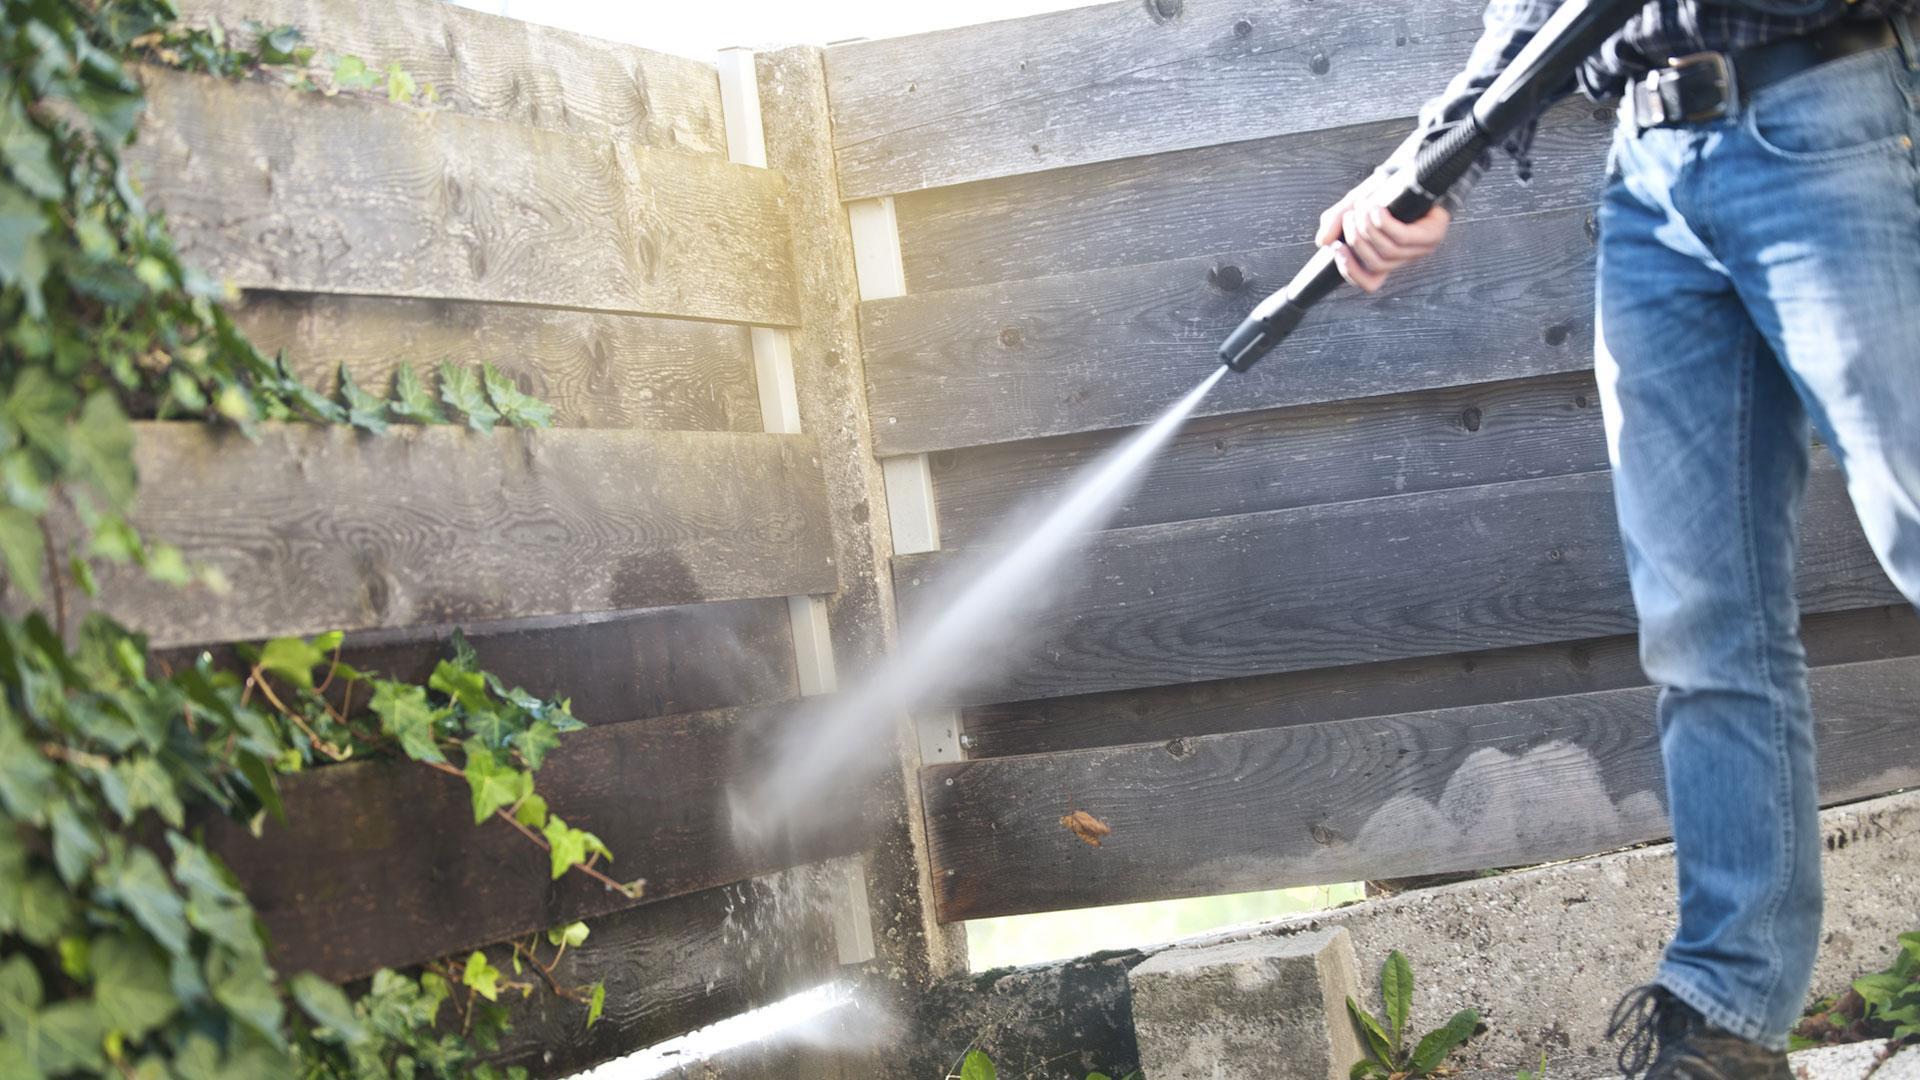 A Wall Mounted Electric Pressure Washer: Extremely Satisfying! 